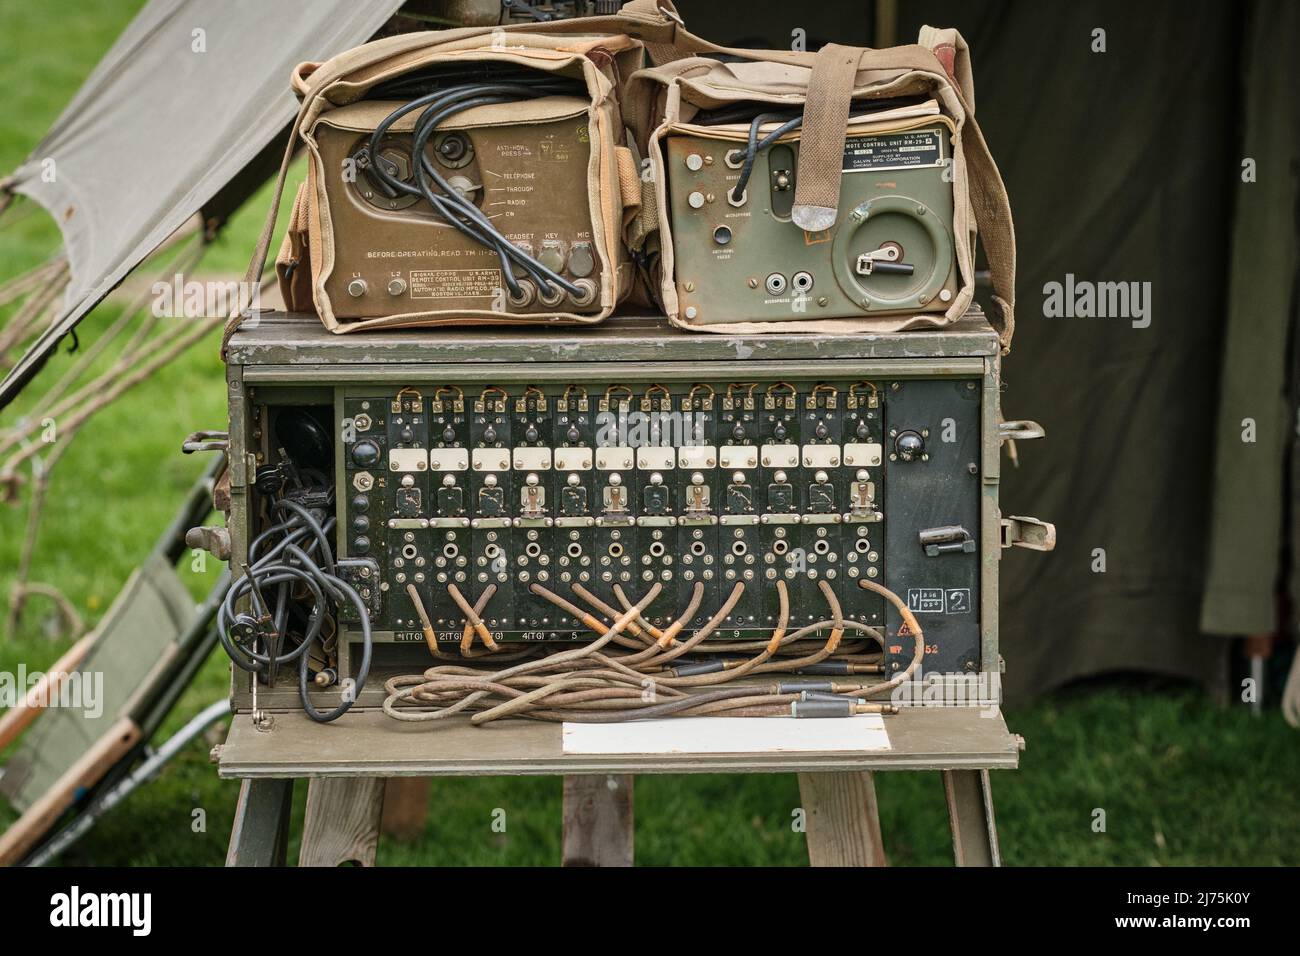 US Signal Corps equipment from World War 2 at the No Man's Land Event at Bodrhyddan Hall, Wales Stock Photo